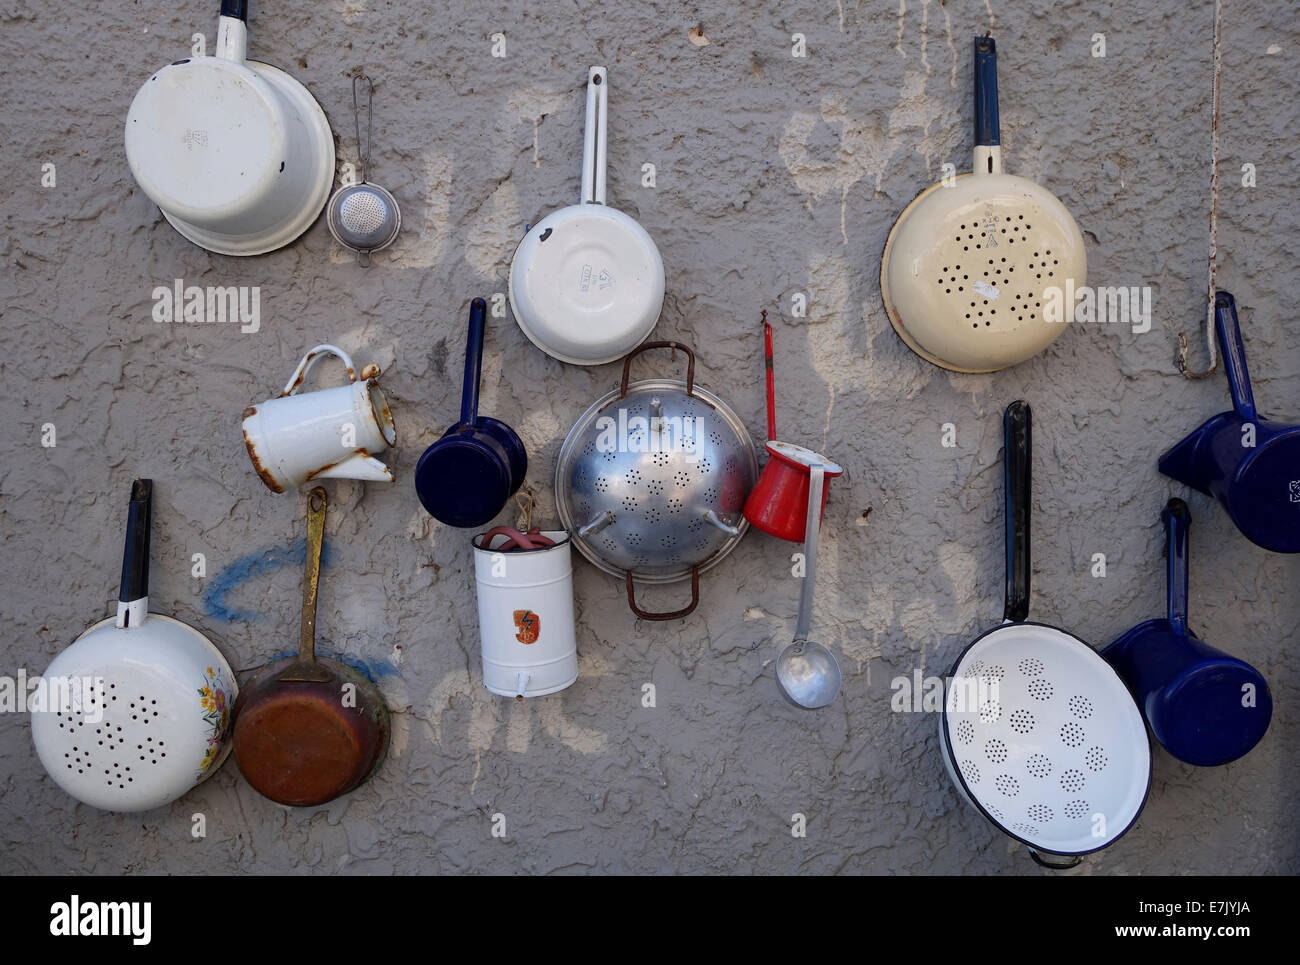 Old kitchen utensils for sale at the Jaffa flea market in Israel Stock Photo